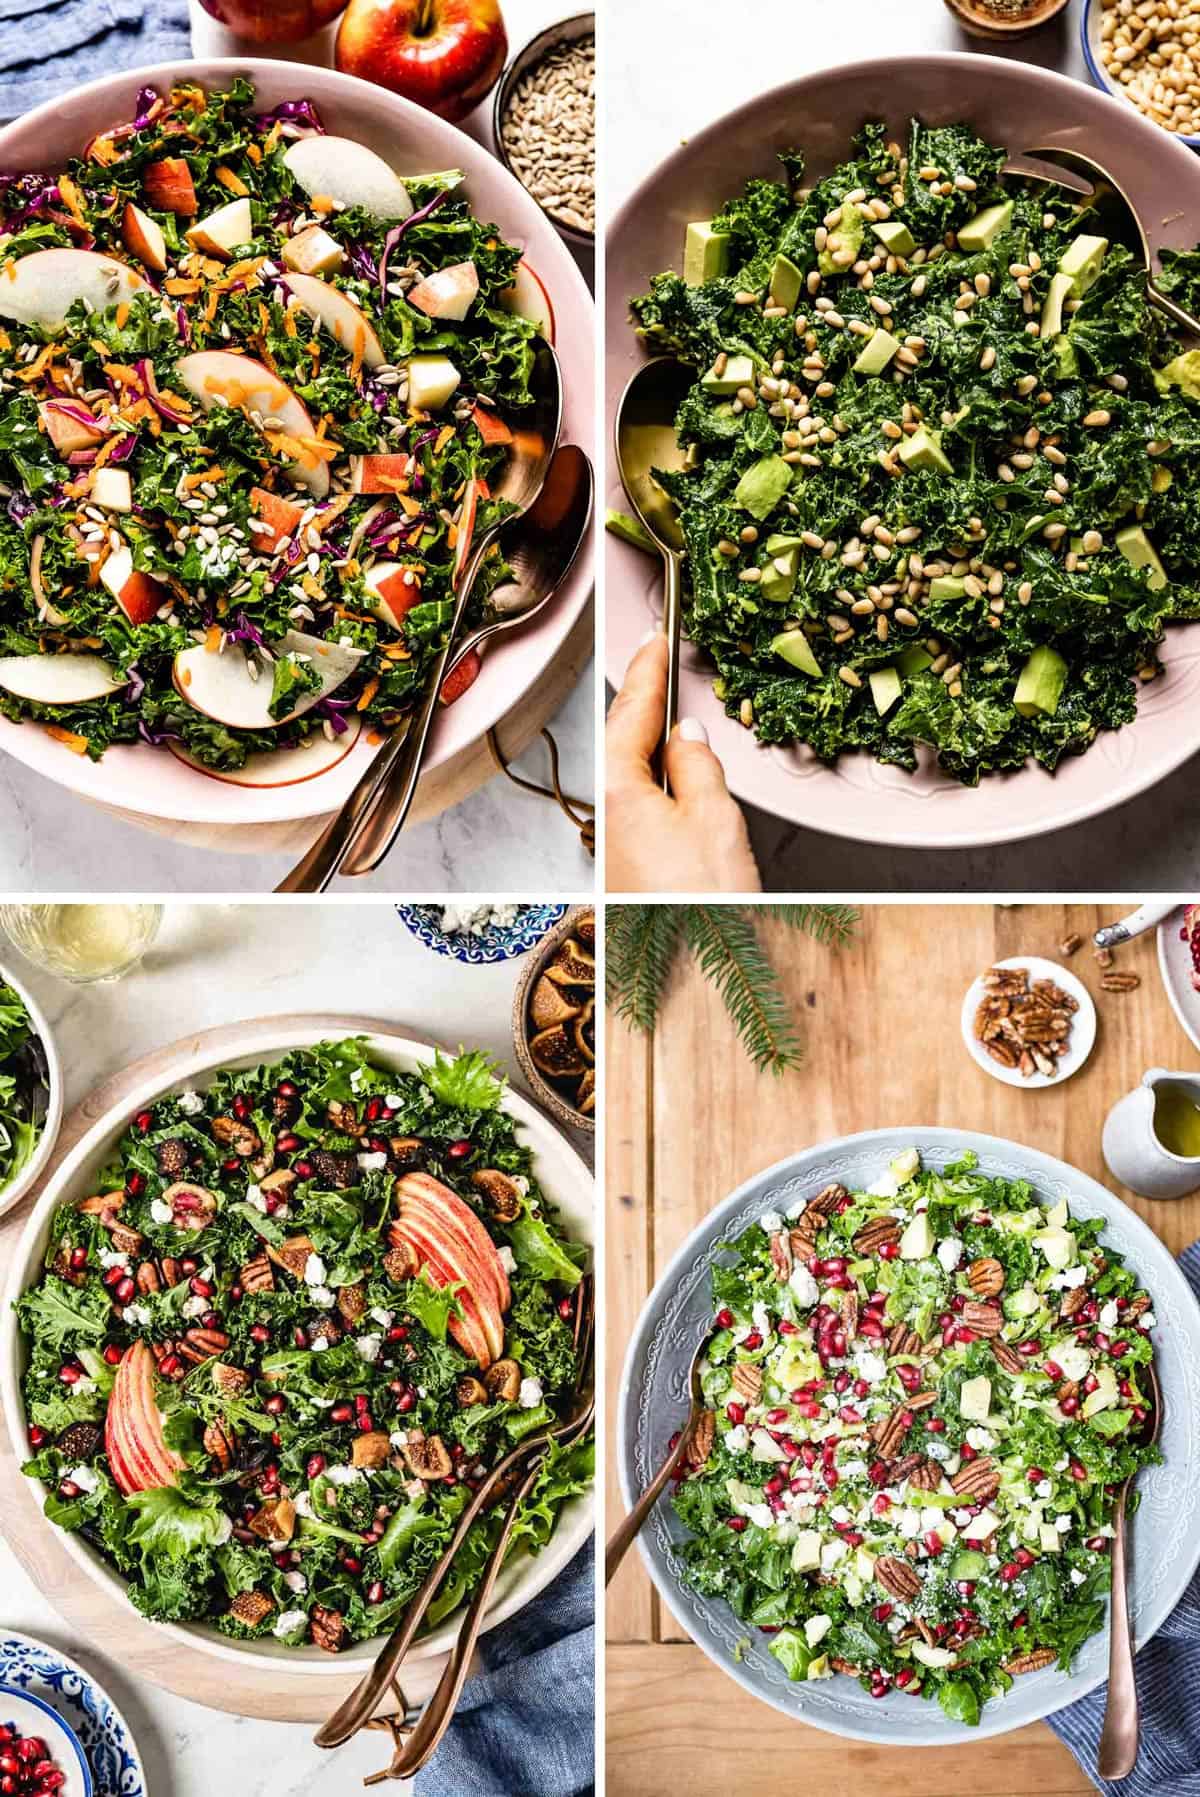 A collage of 4 salads with kale from the top view.